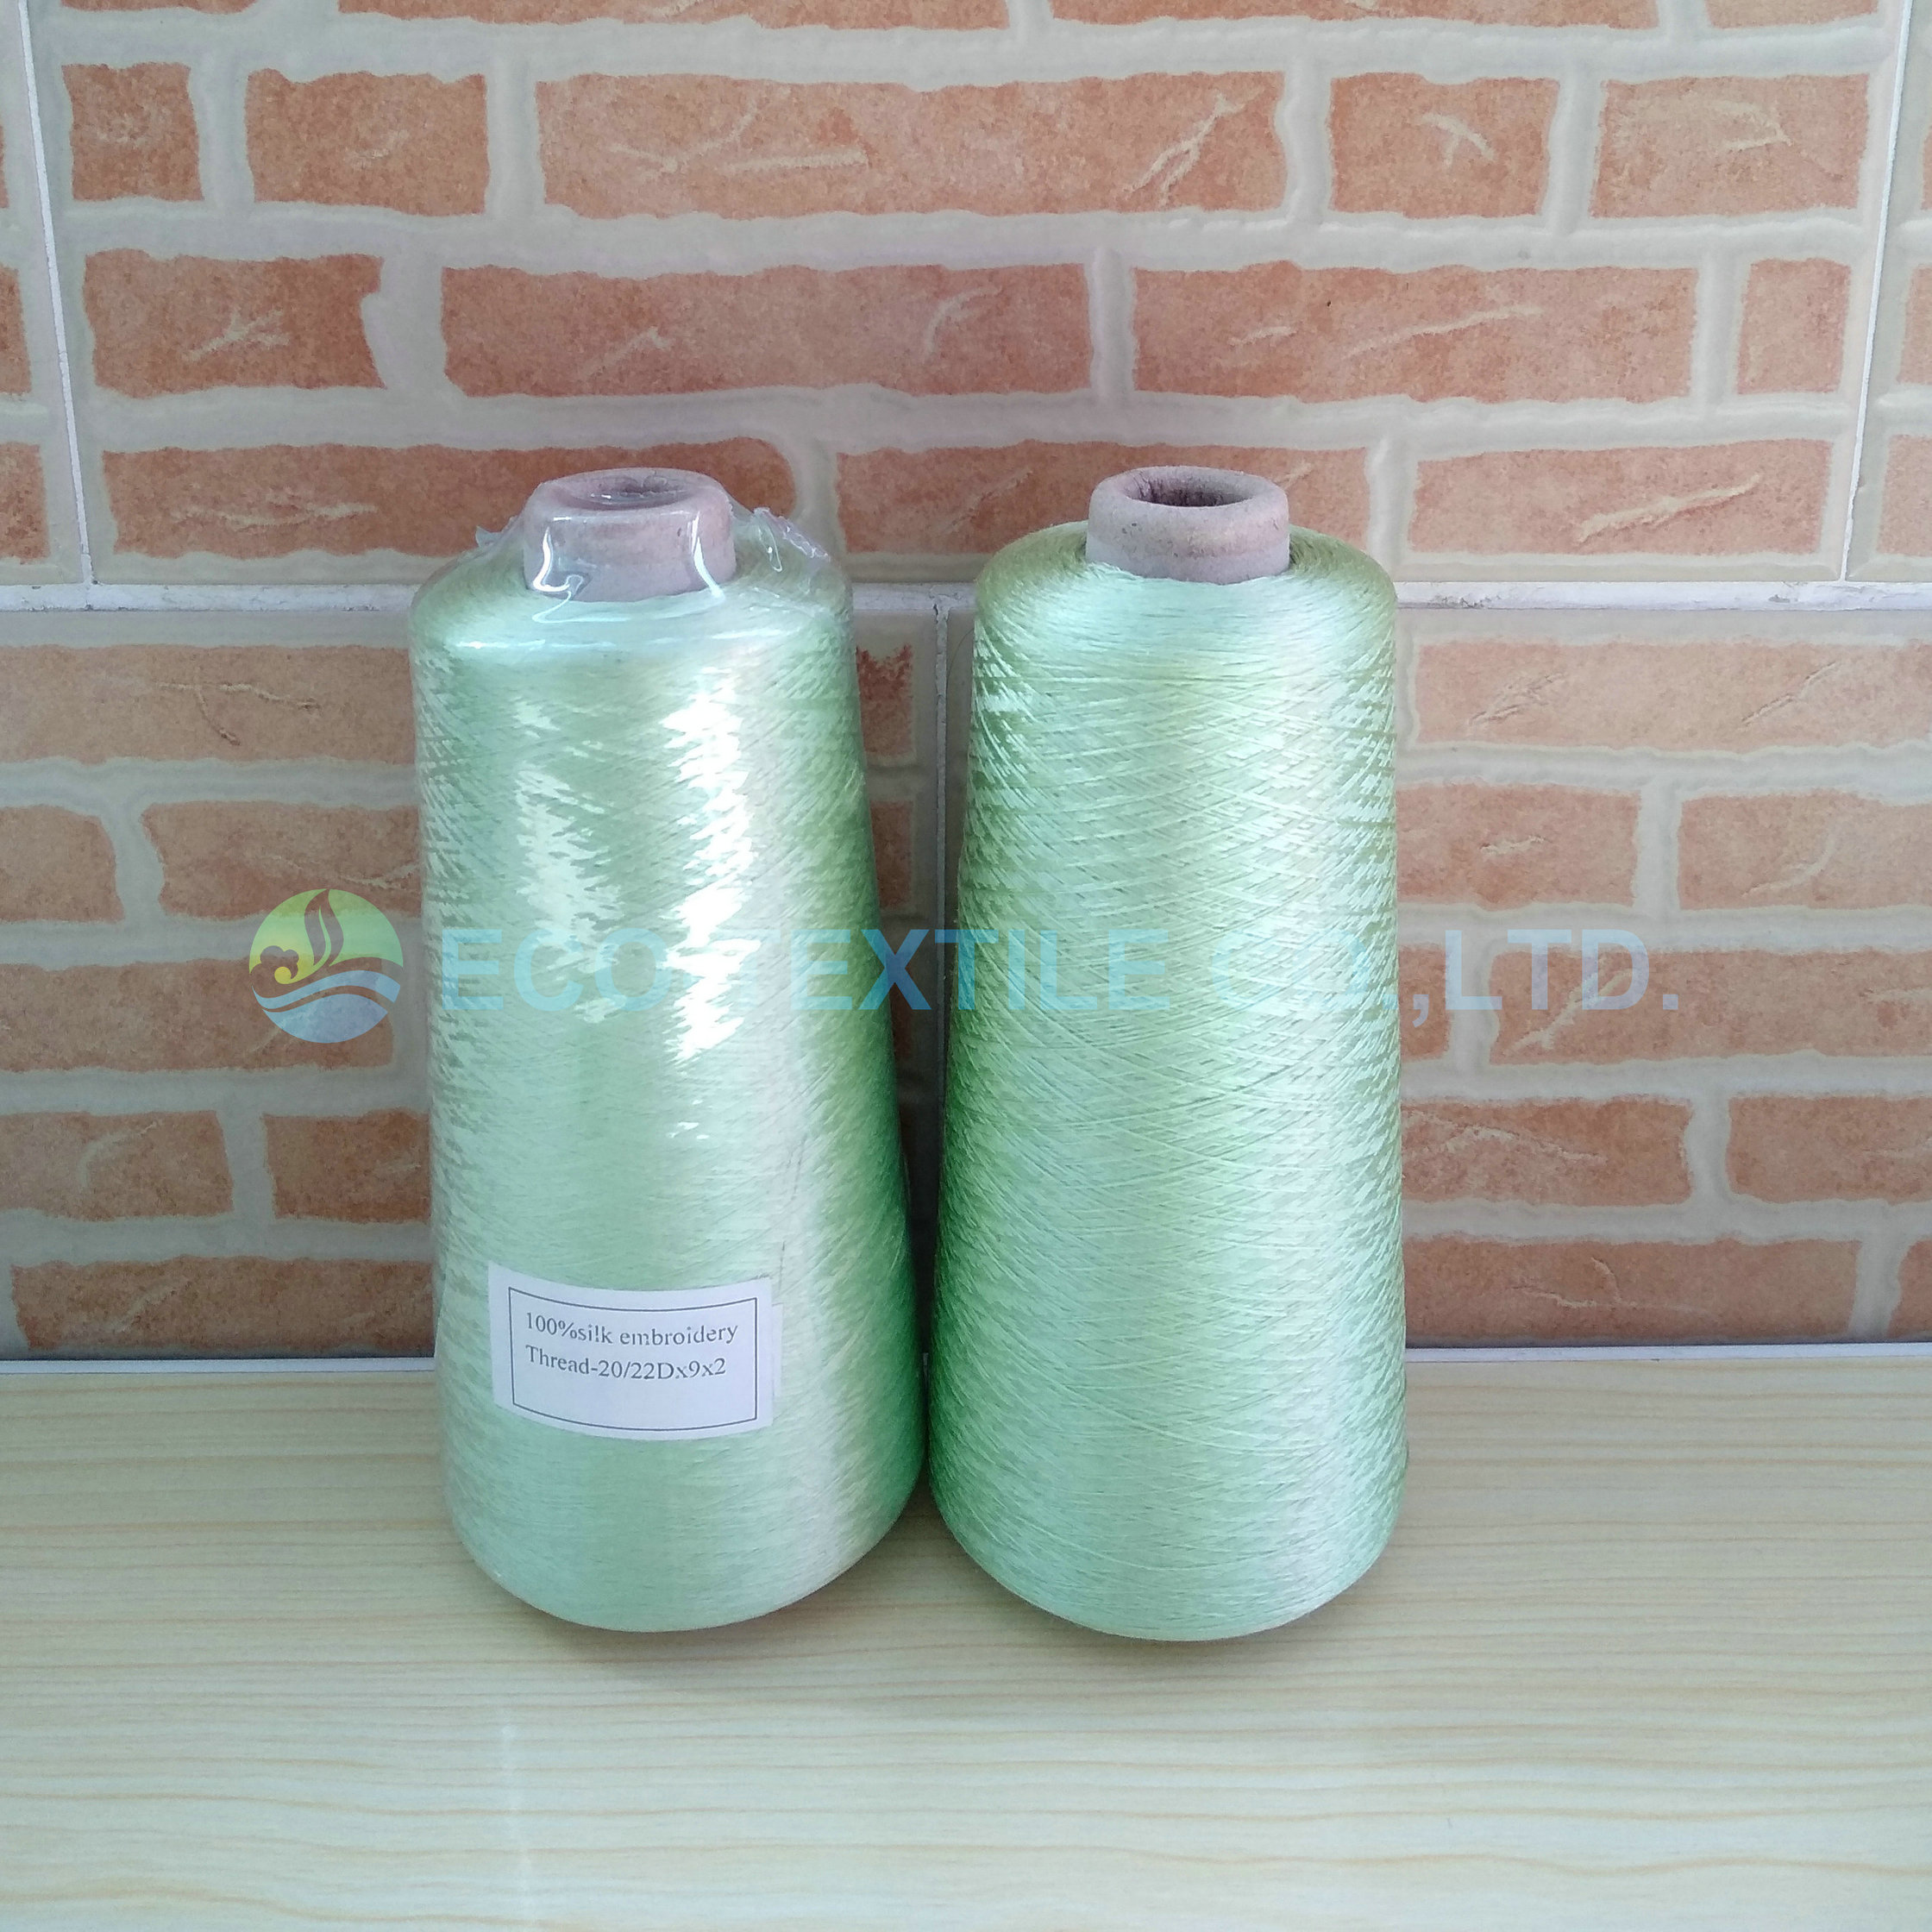 MULBERRY SILK EMBROIDERY THREAD -20/22Dx9x2 